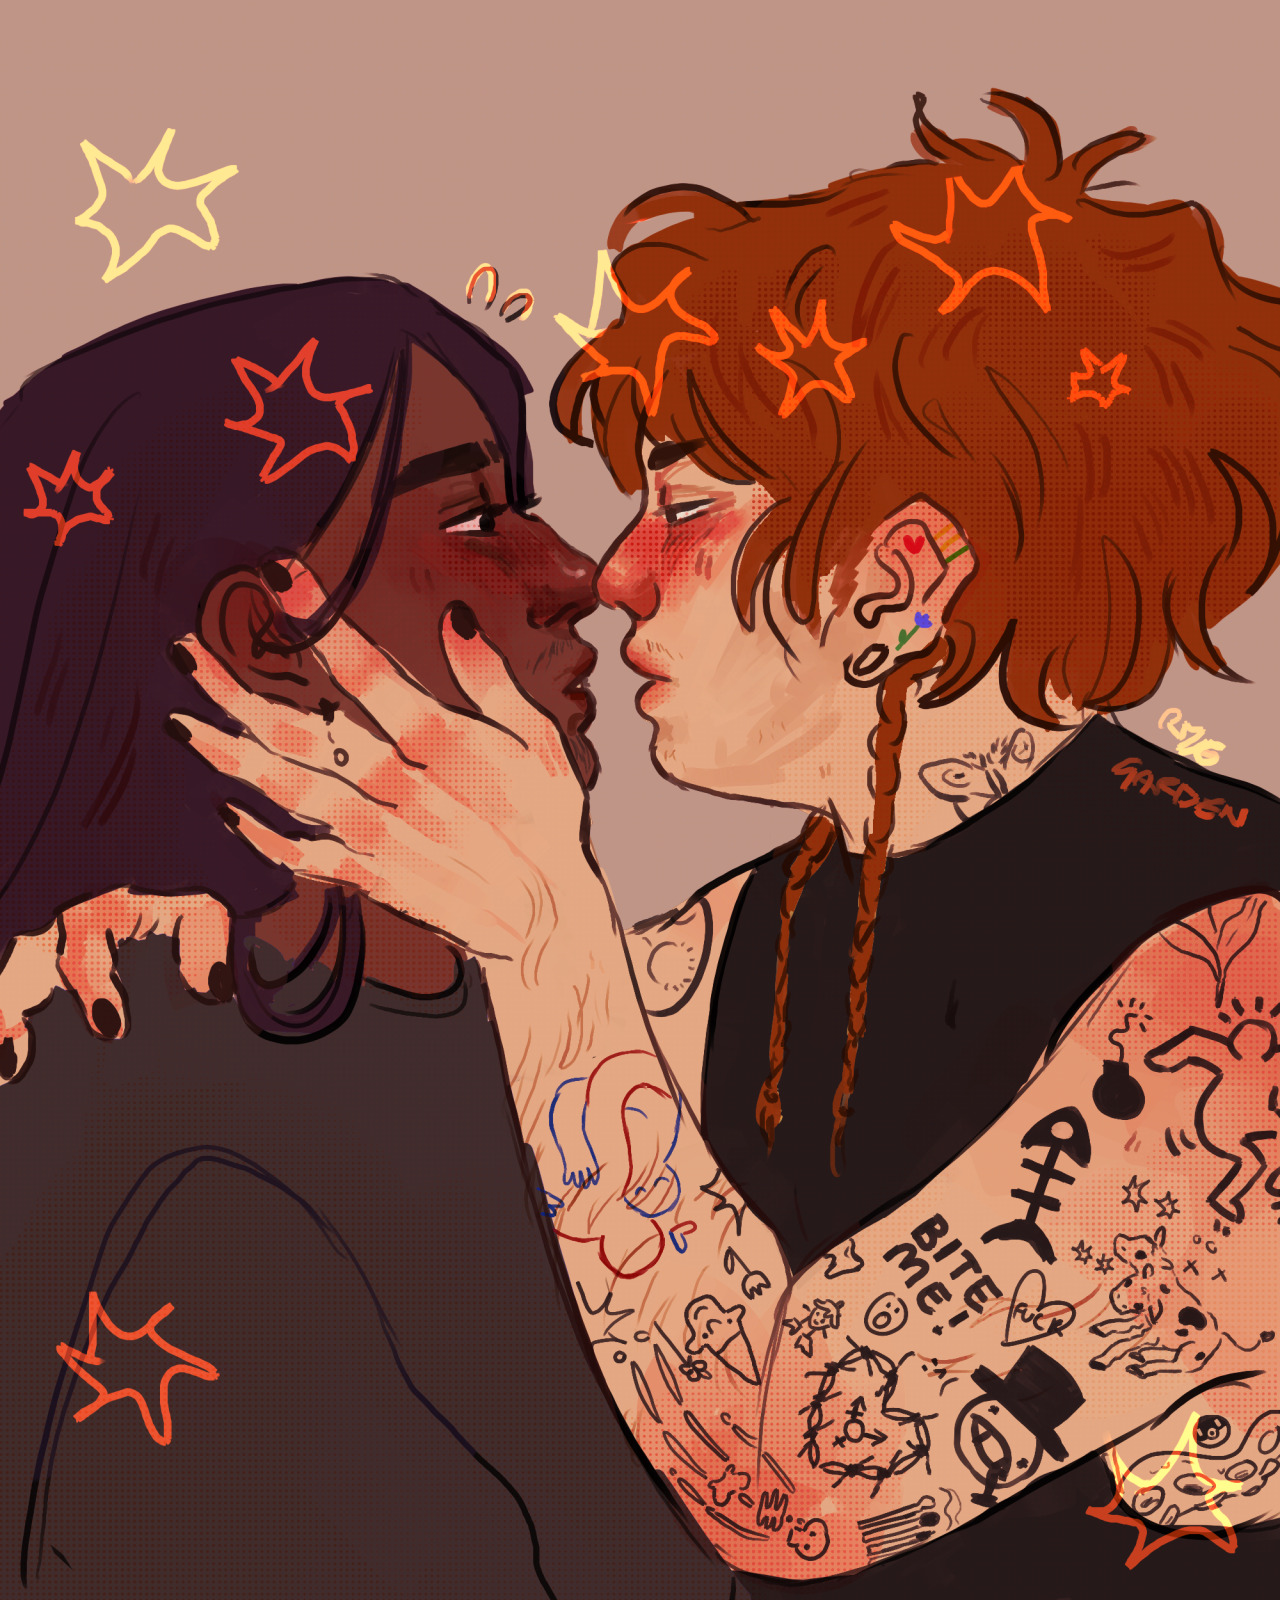 nervous kiss #wlw#mlm#nblnb#t4t #as always; you know how it is  #someones gonna tag this as jonmartin or smth arent they. hm  #anyway these are my new ocs ive decided  #their names are olivine (left) and marmalade (right)  #marm and olive